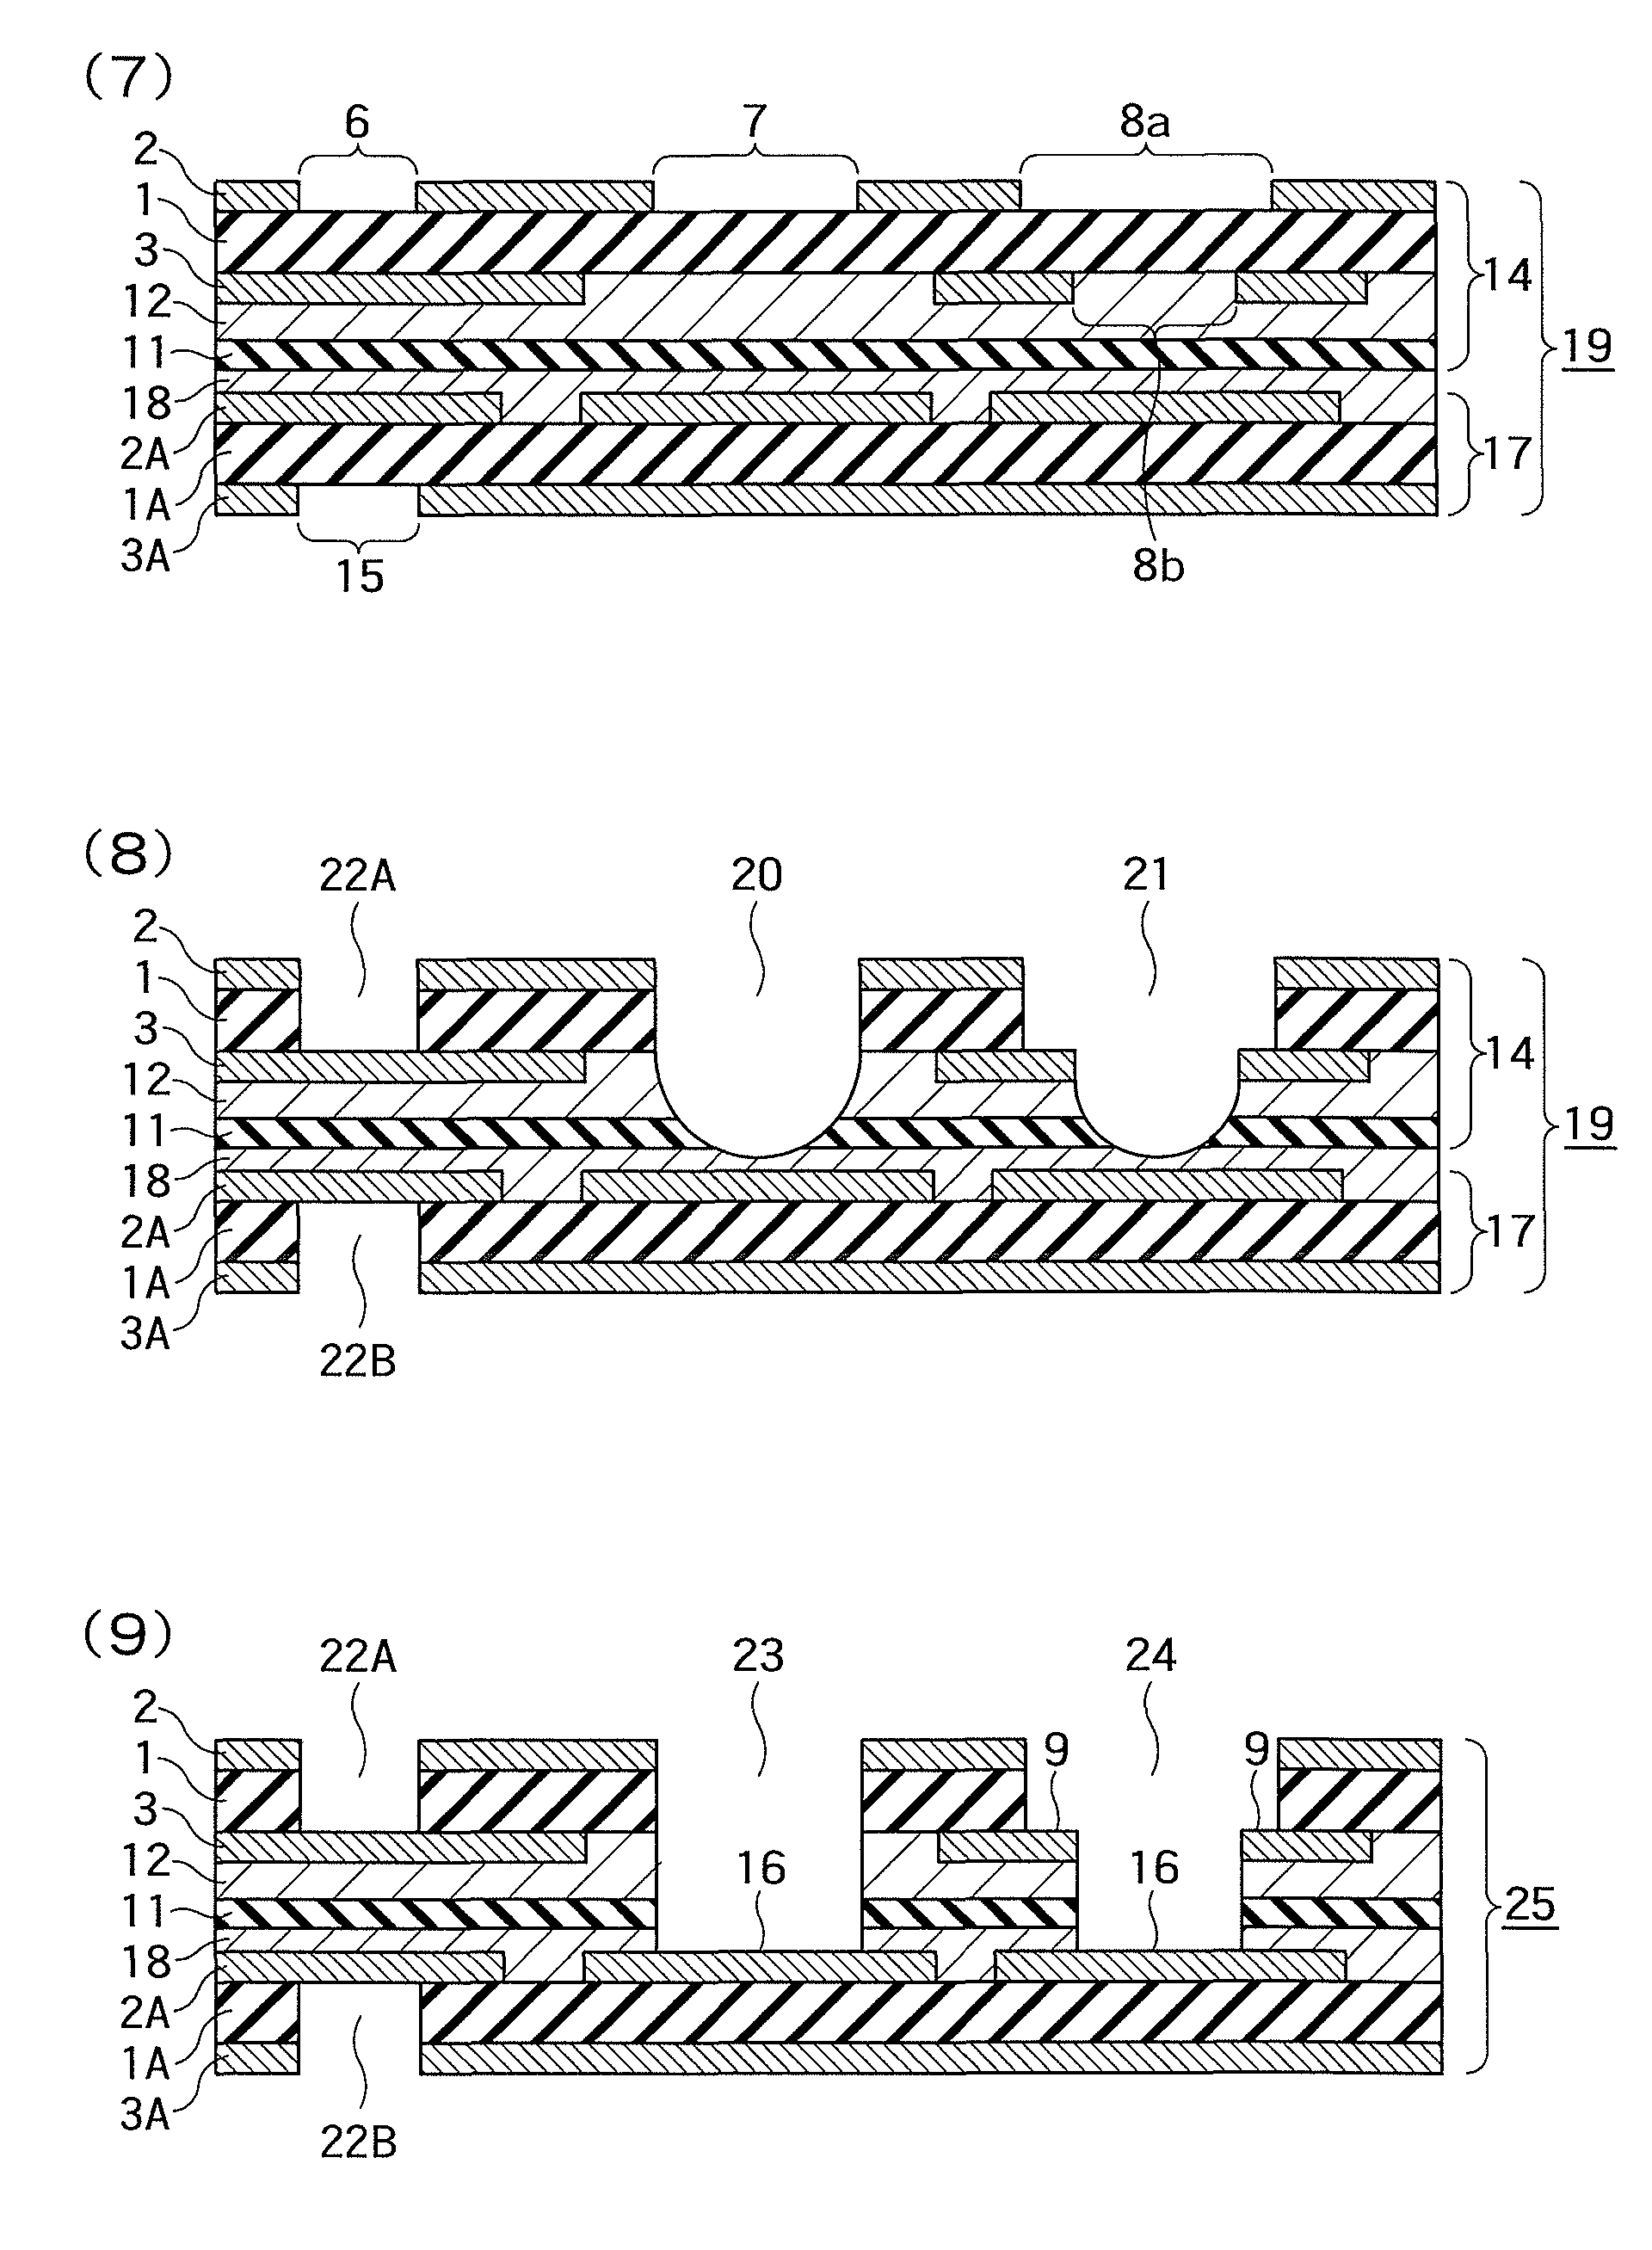 Laser processing method and production method of multilayer flexible printed wiring board using laser processing method